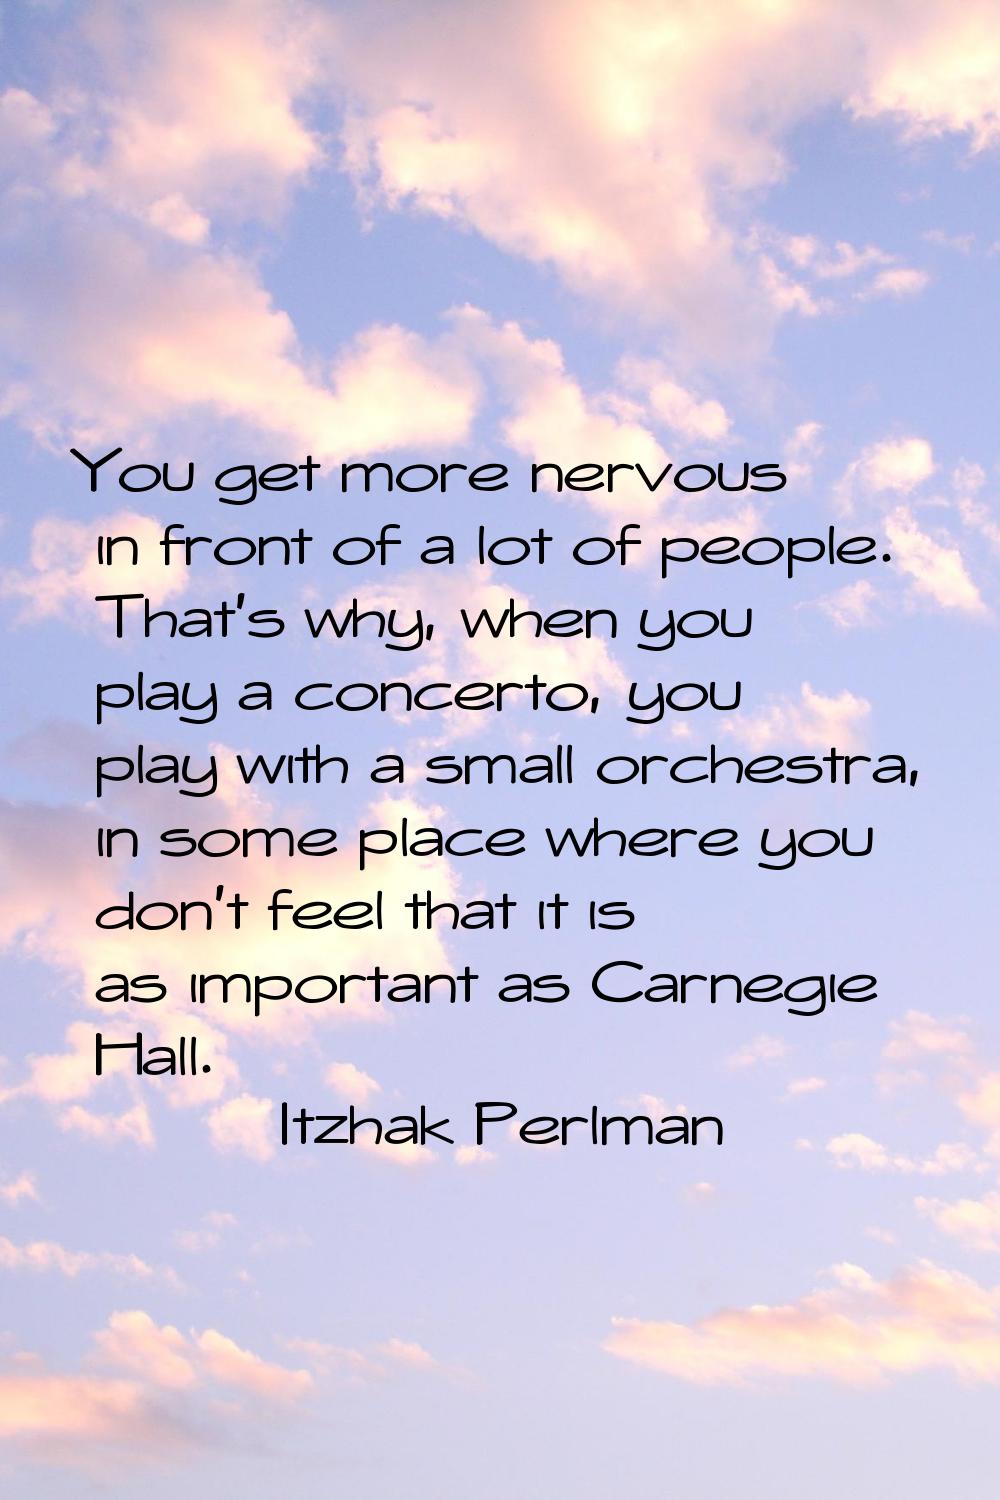 You get more nervous in front of a lot of people. That's why, when you play a concerto, you play wi